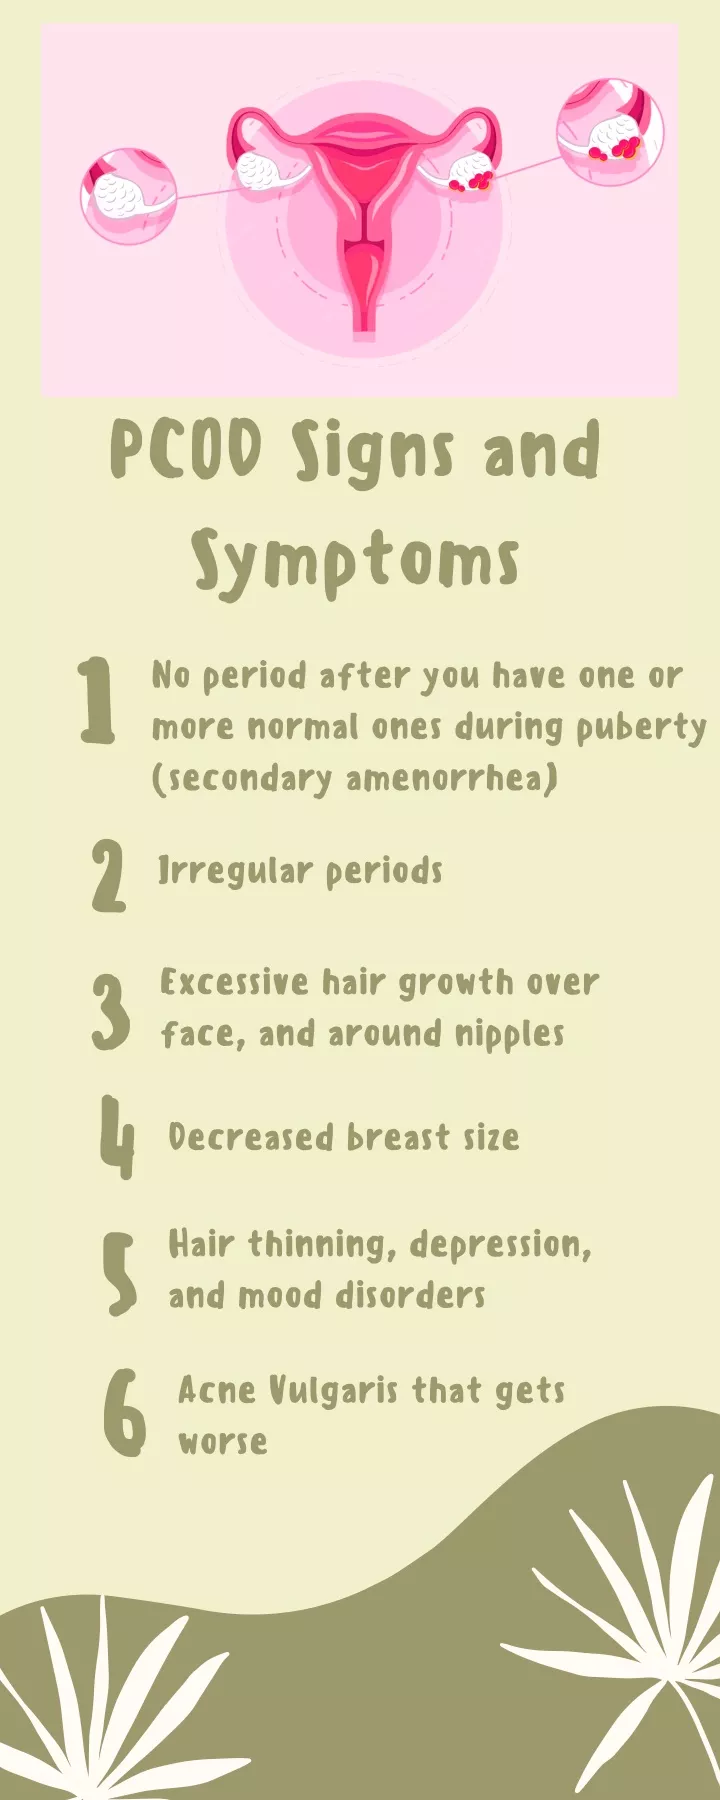 pcod signs and symptoms 1 secondary amenorrhea